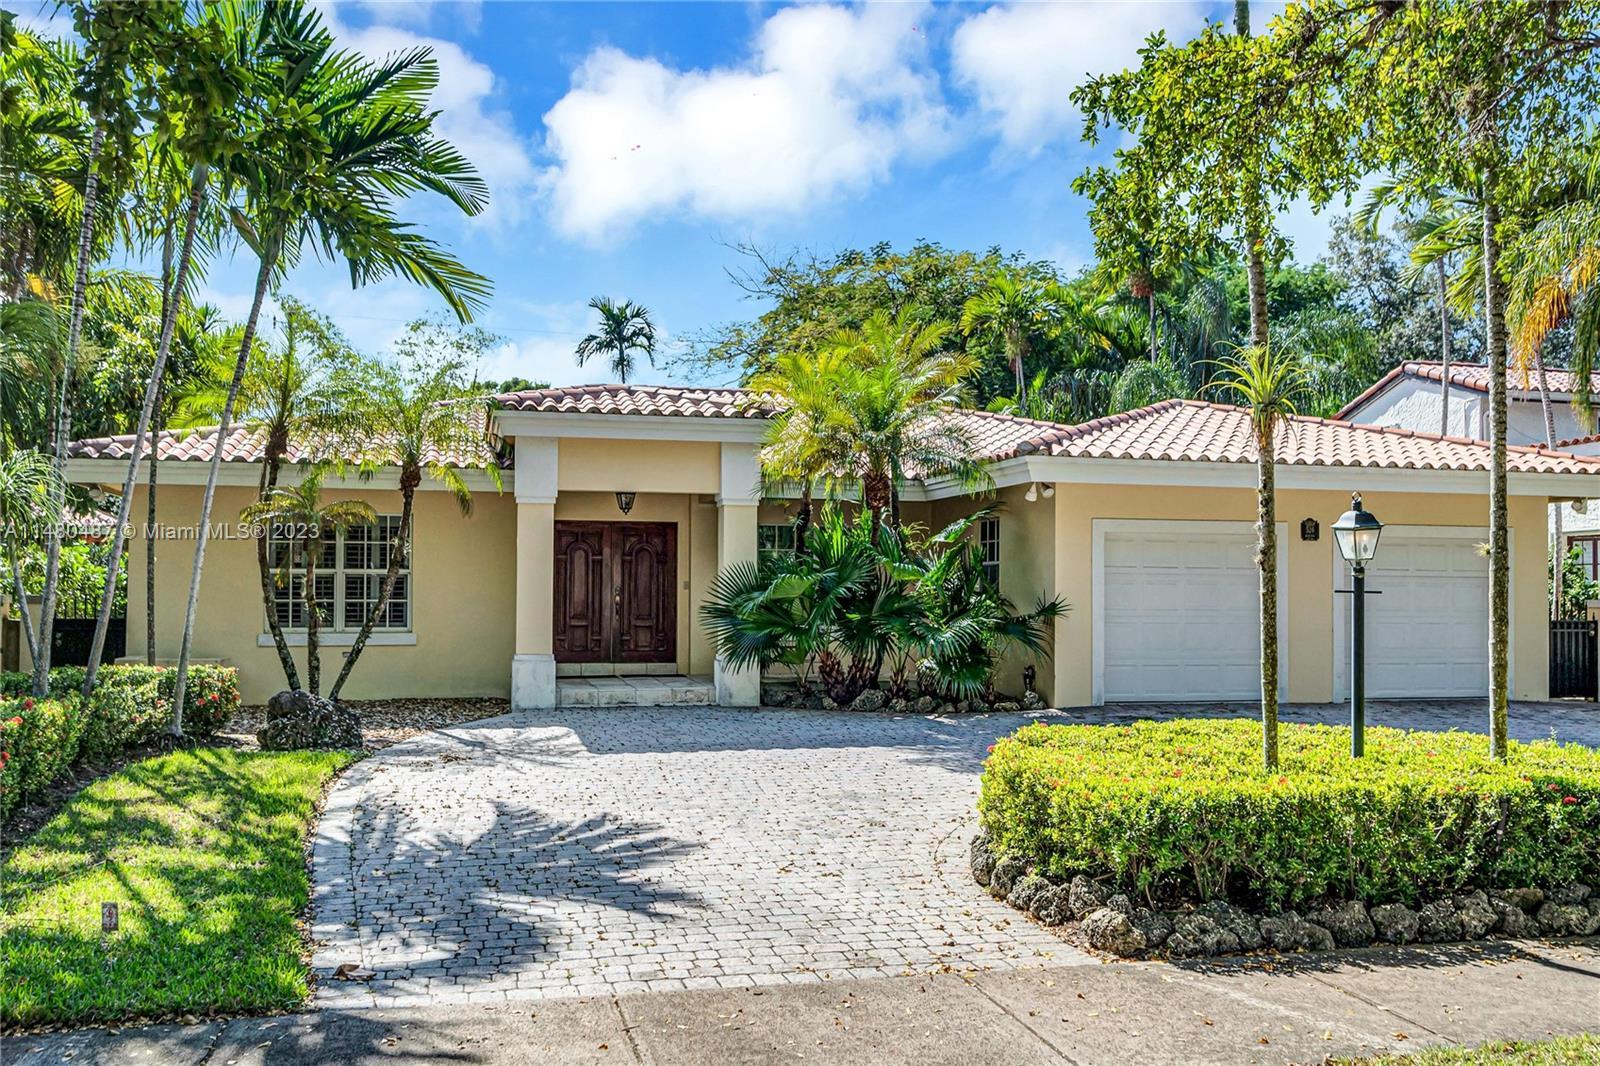 Photo of 526 Madeira Ave in Coral Gables, FL